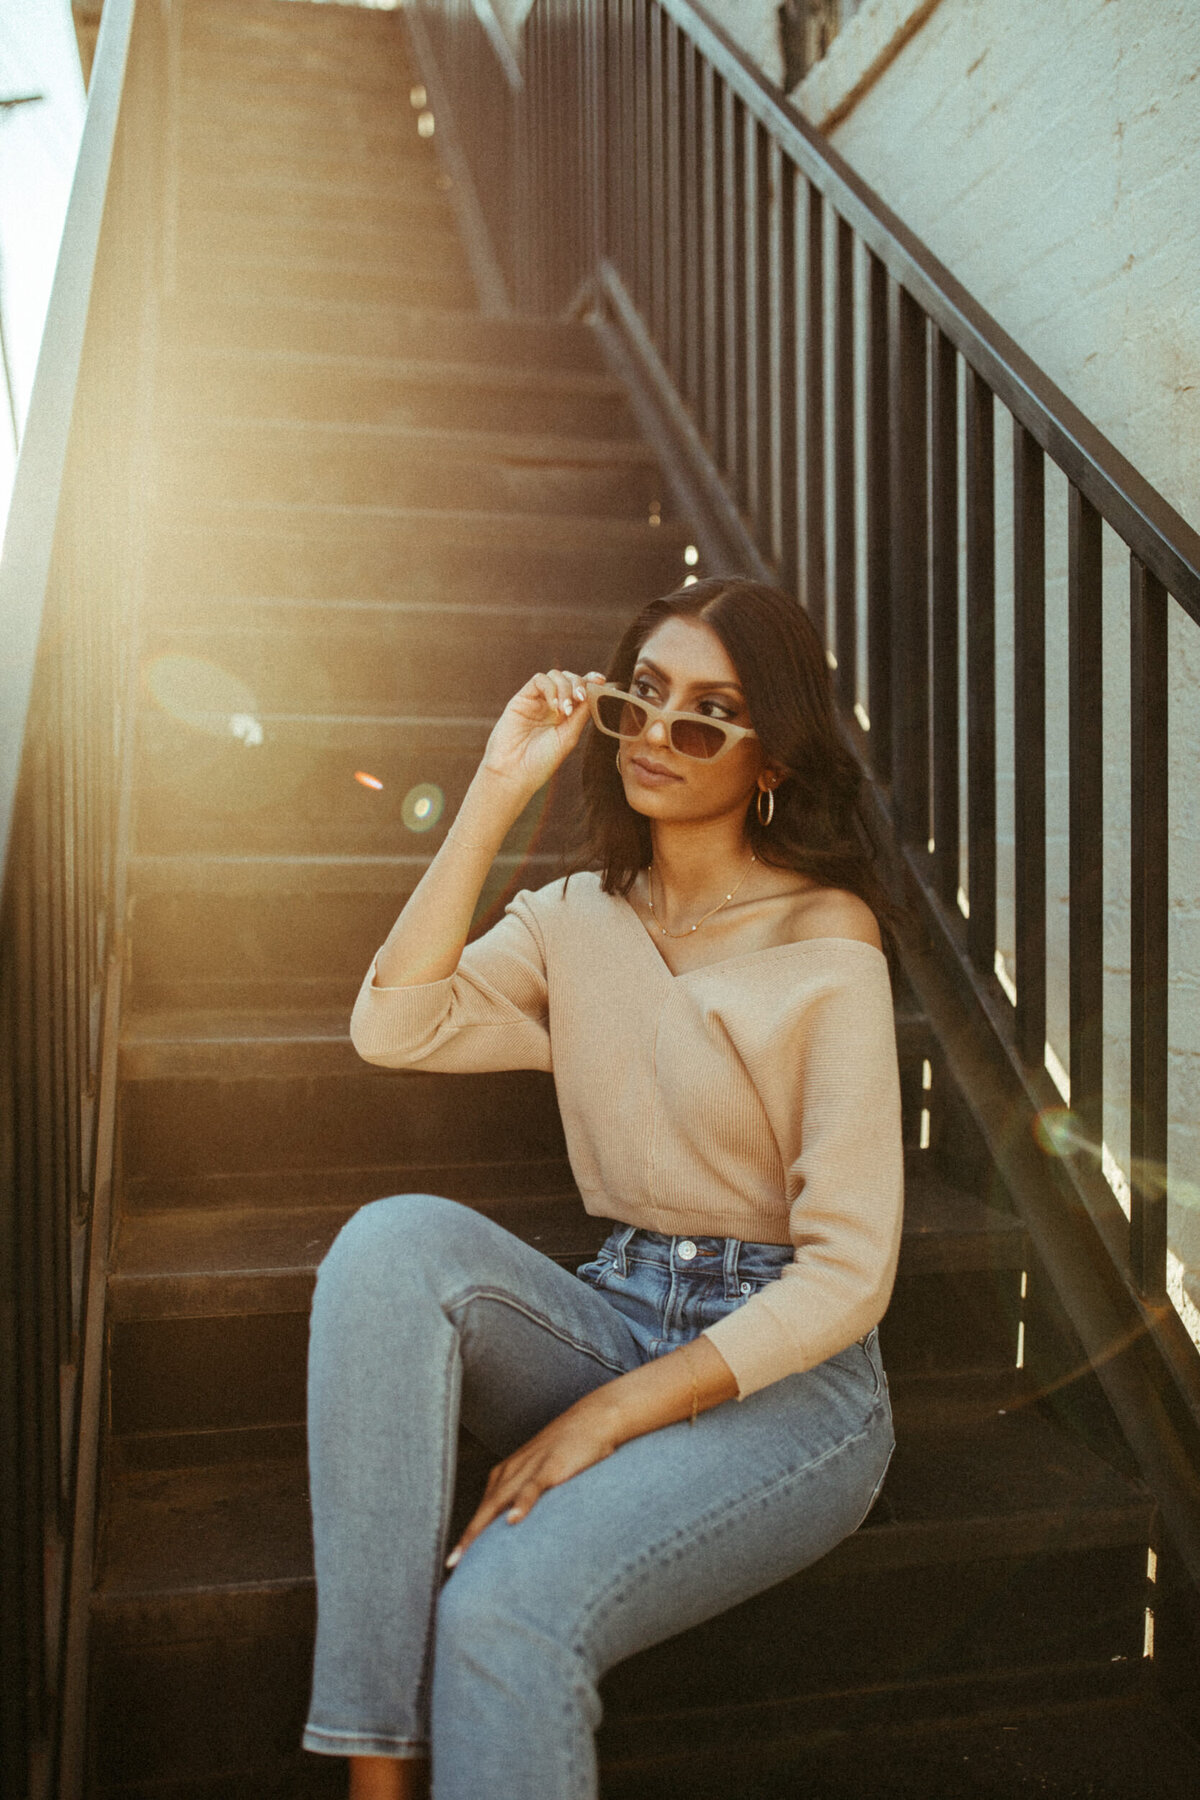 High school senior with vintage style wearing sunglasses and sitting on a black staircase downtown